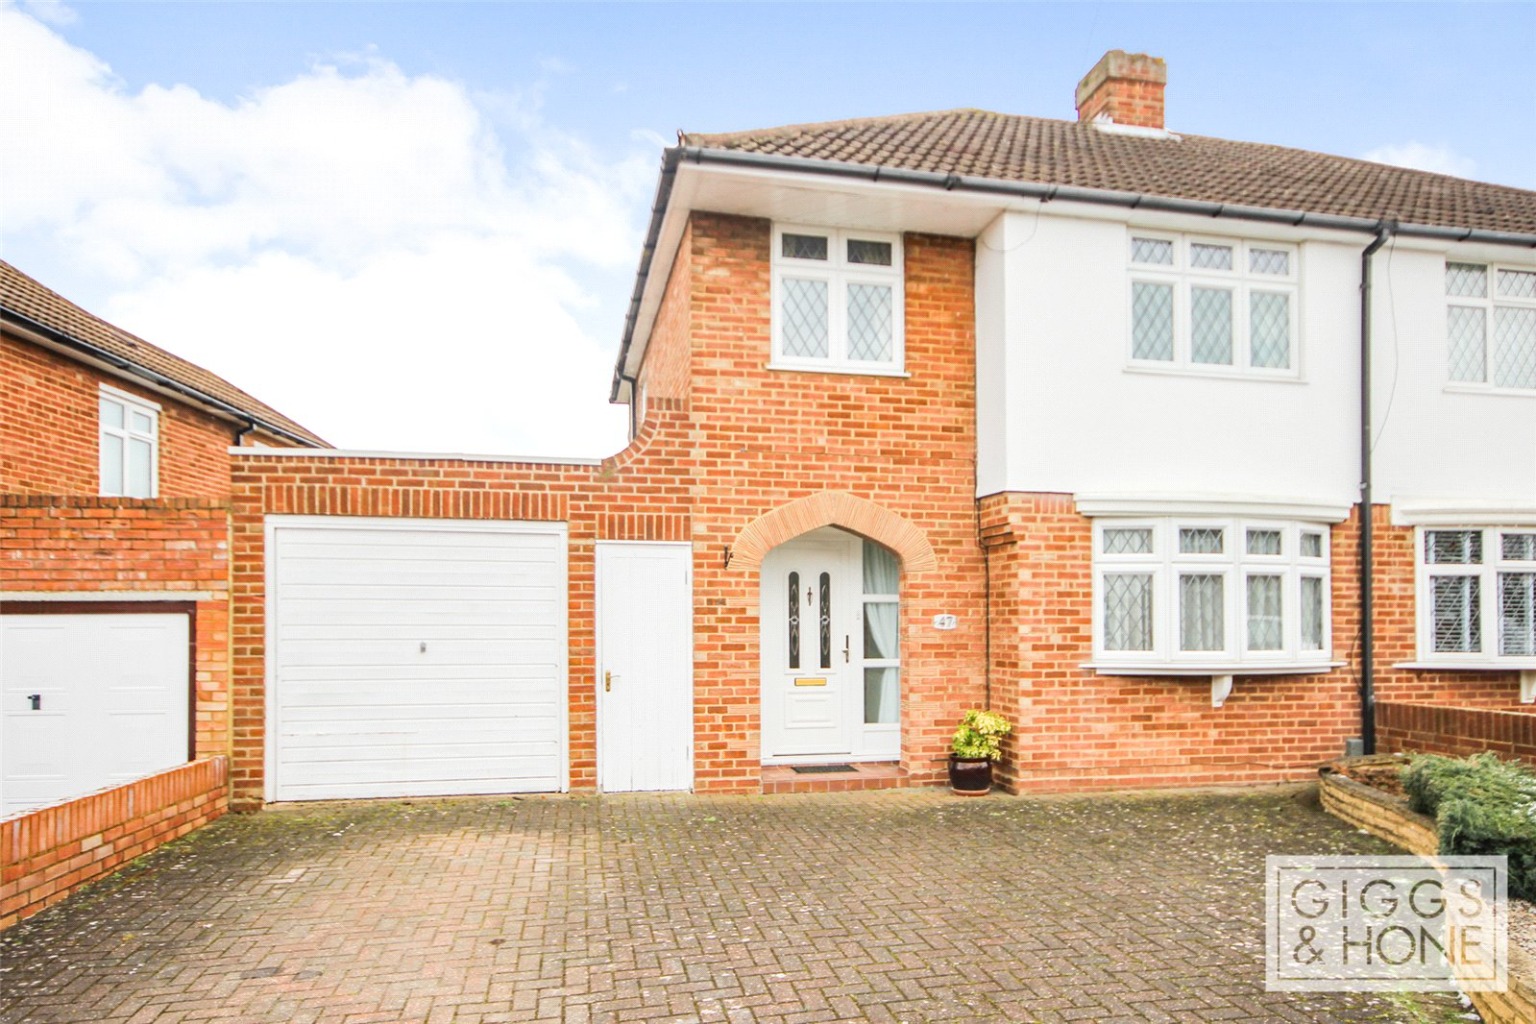 This extended family home is offered for sale in the desirable area of Putnoe, the property benefits from a garage and driveway to the front for a minimum of two vehicles.